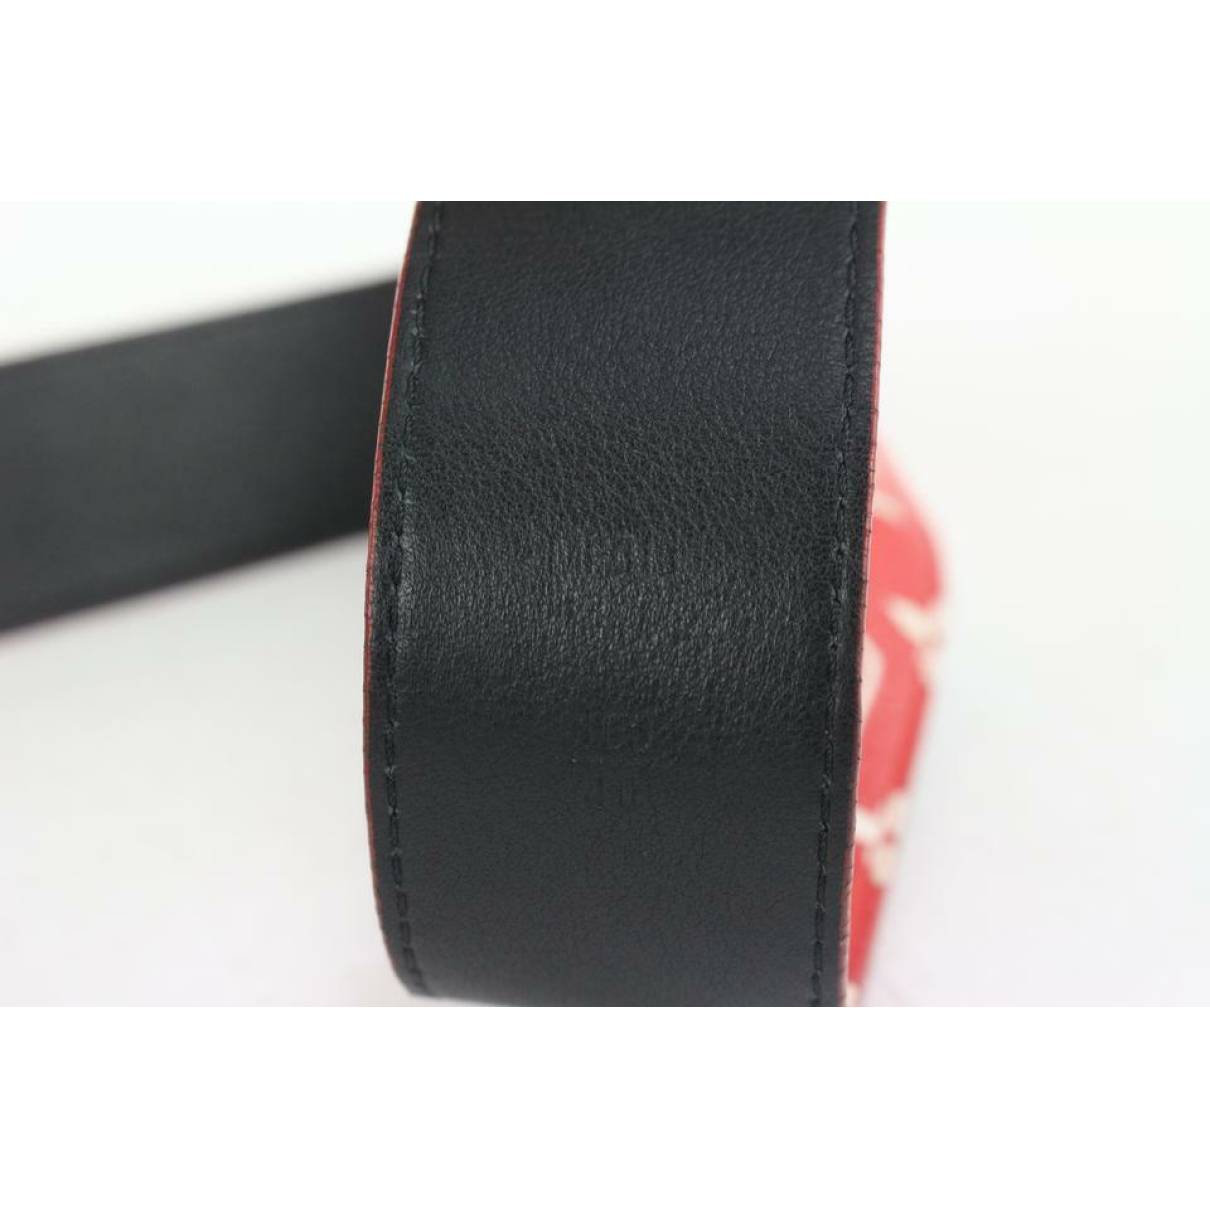 Louis Vuitton x Supreme - Authenticated Belt - Red for Women, Very Good Condition